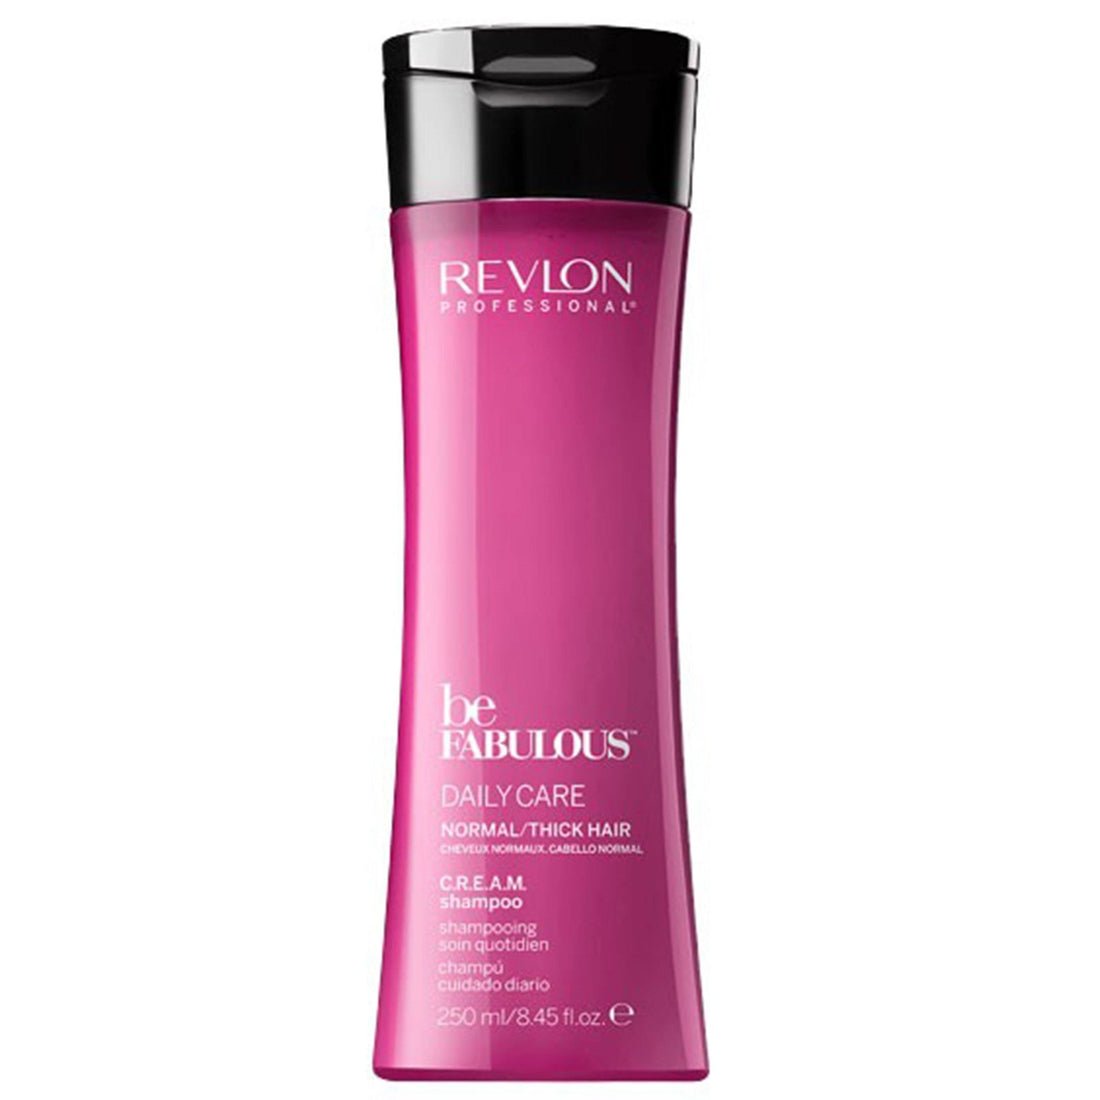 Buy Revlon Professional Be Fabulous Daily Care Normal/Thick Shampoo 250ml on HairMNL